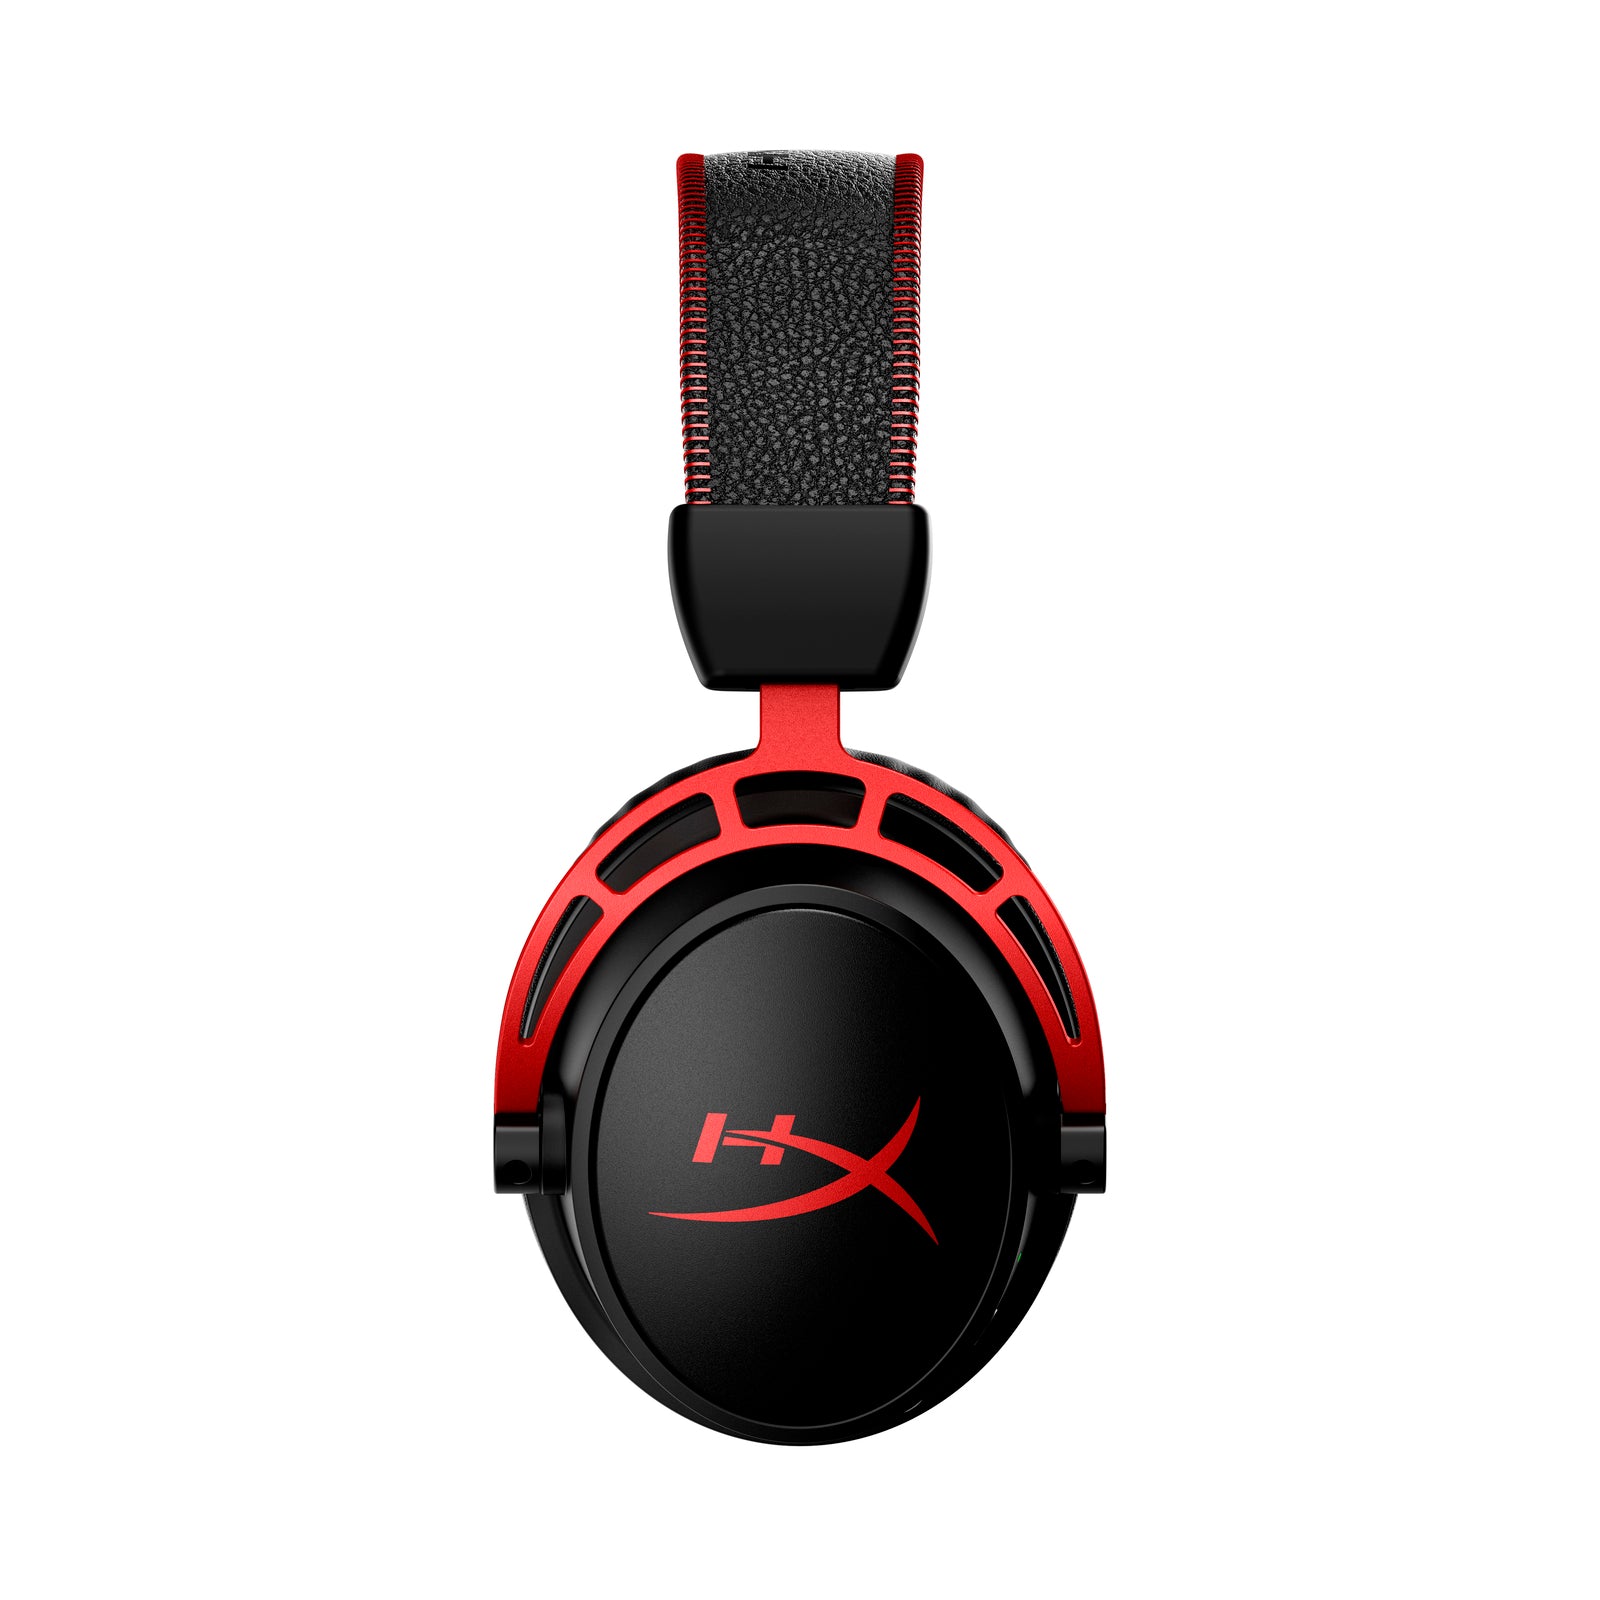 Left facing view of Cloud Alpha Wireless gaming headset